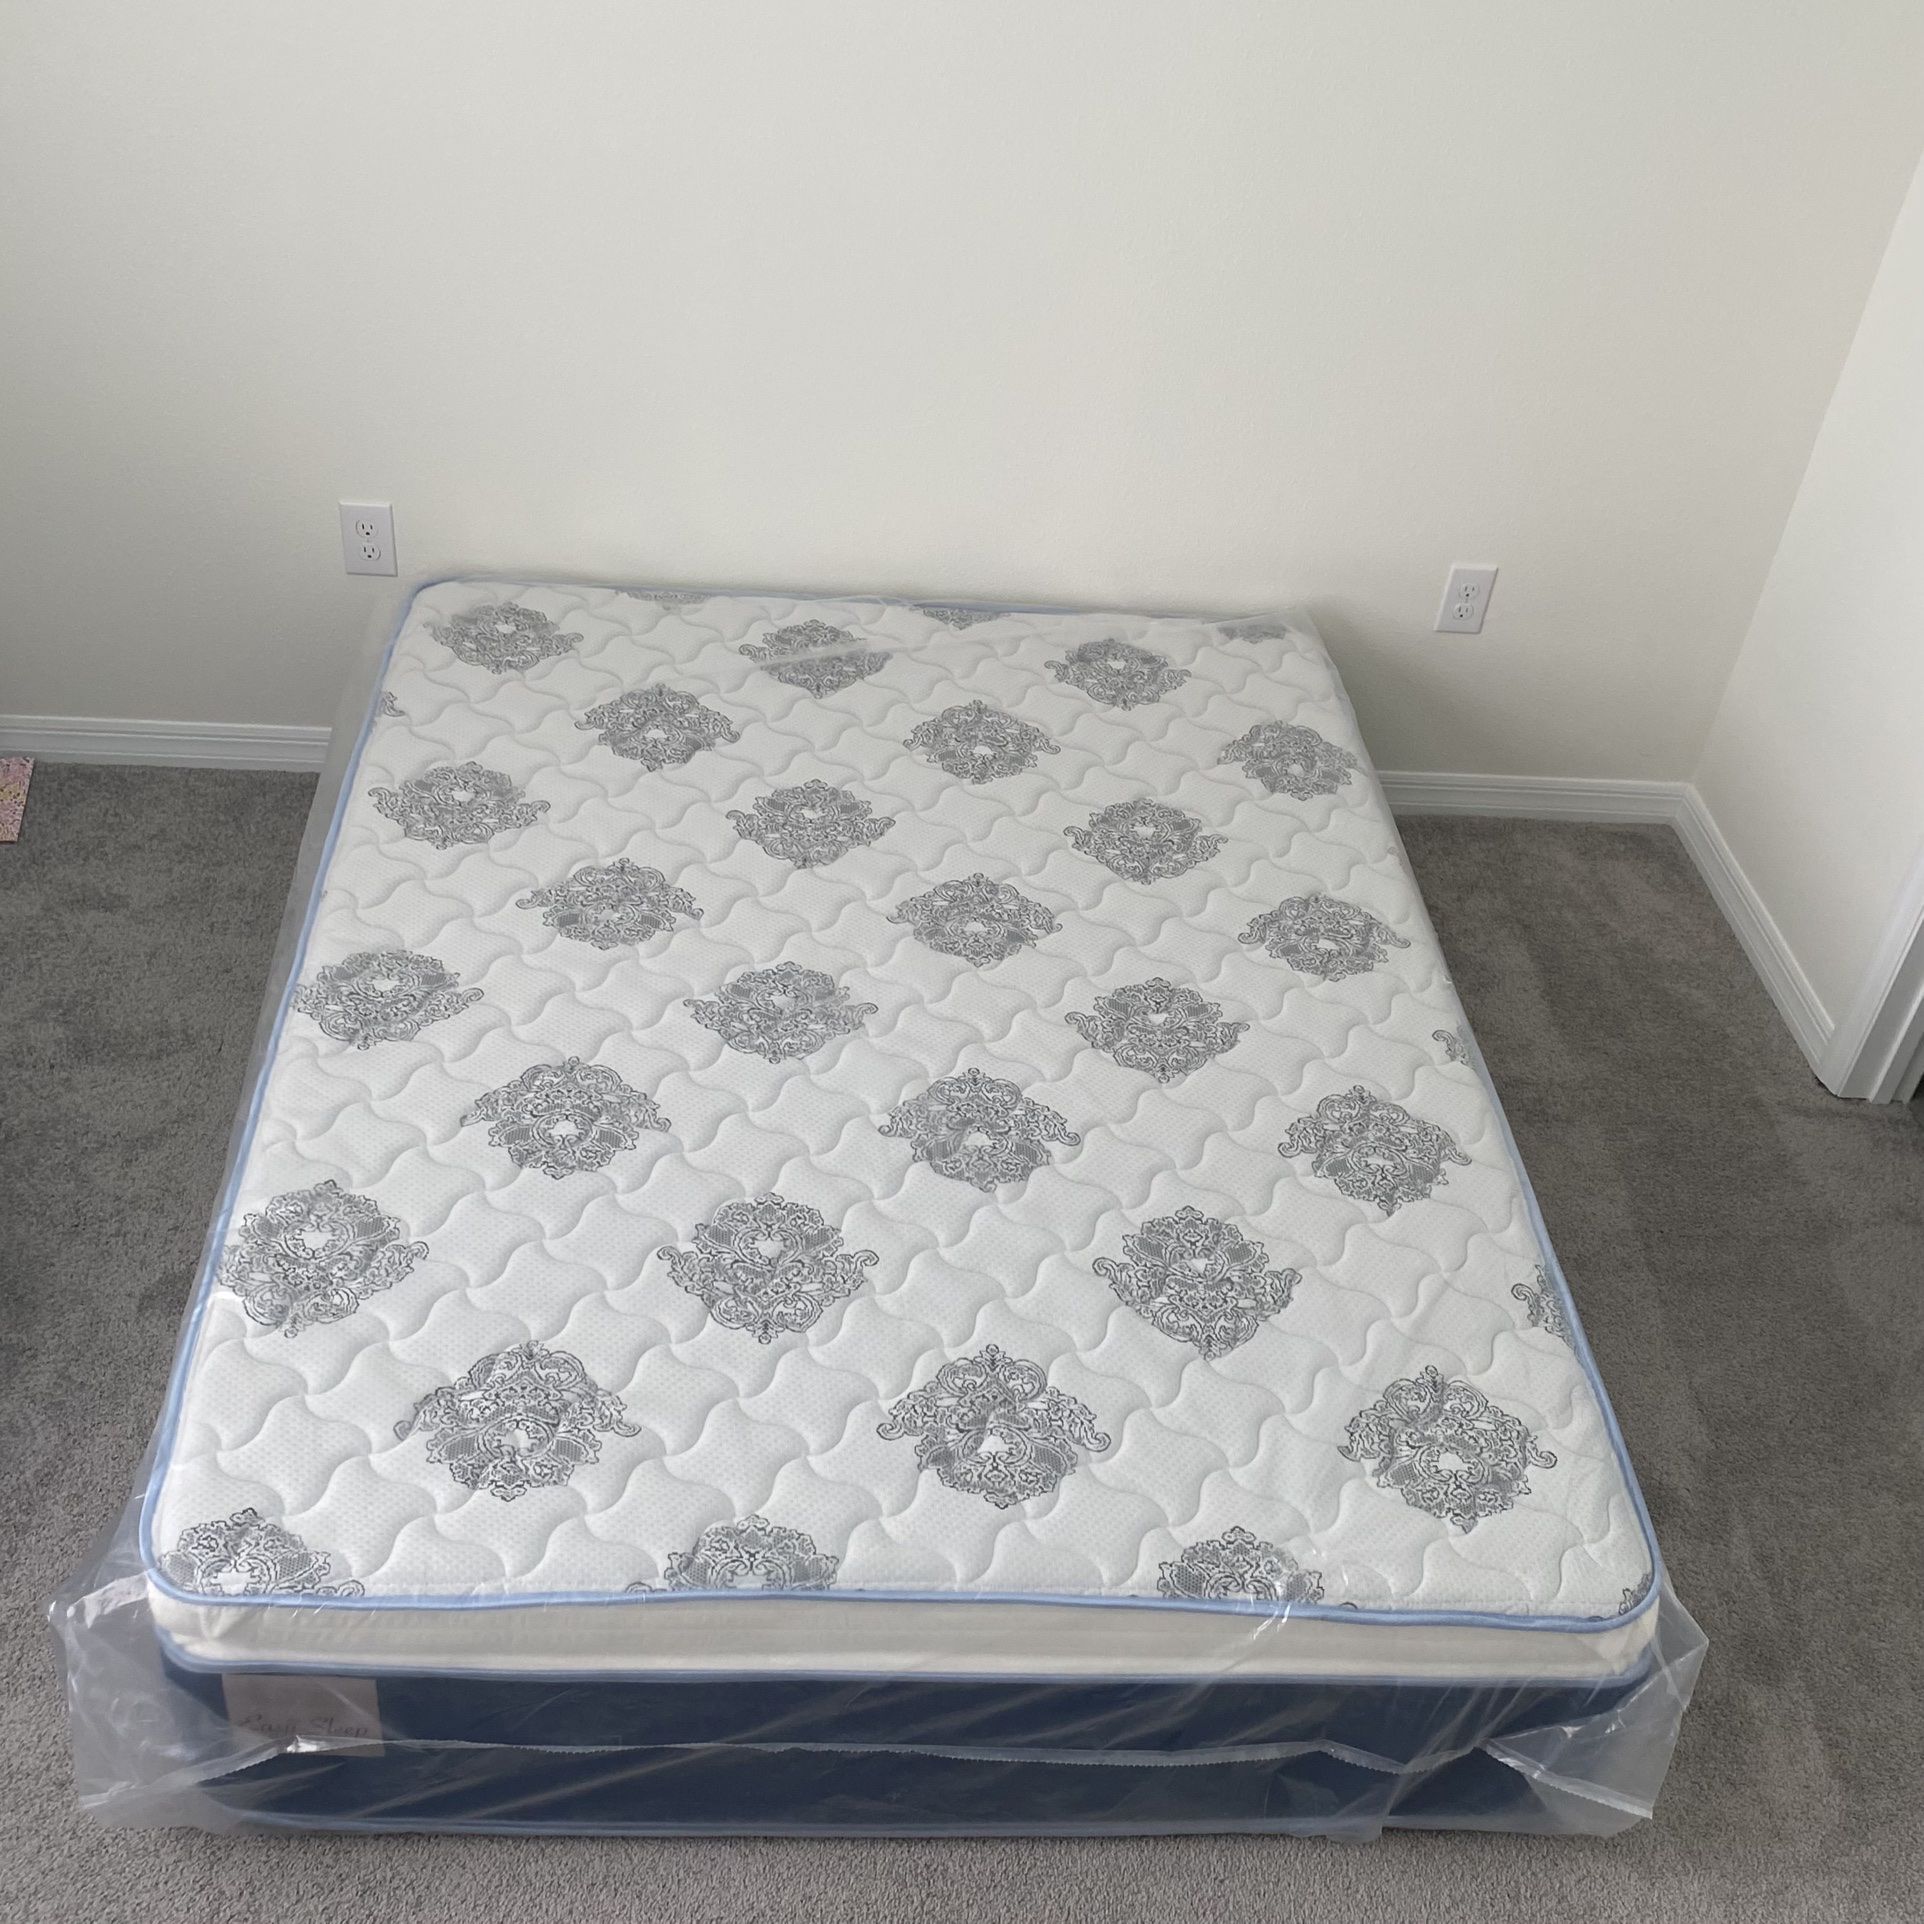 Queen Size Mattress 14” Inches Pillow Top Of High Quality Also Available in Twin-Full-King and Cali-King Same Day Delivery